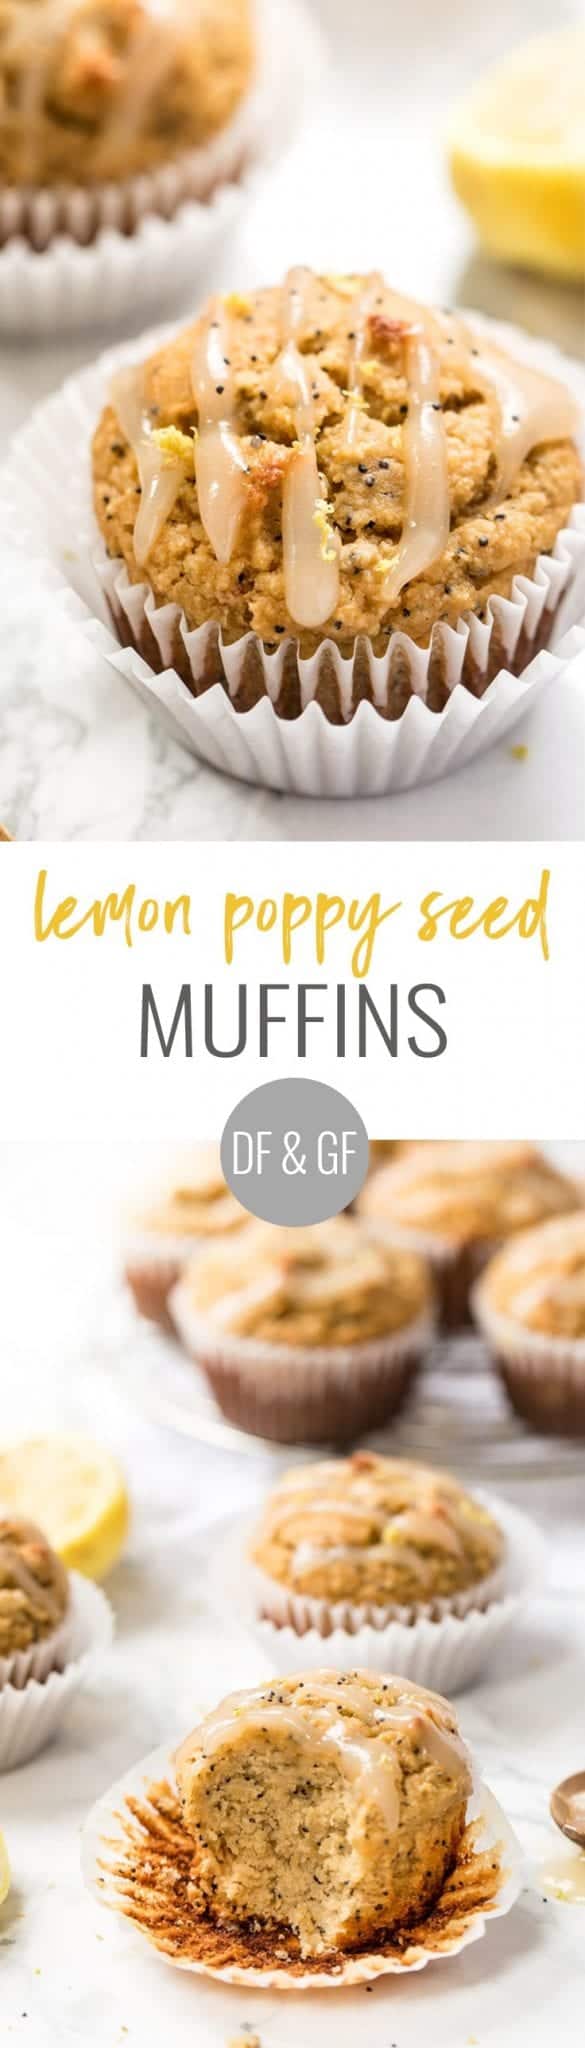 gluten-free lemon poppy seed muffins with lemon coconut butter icing